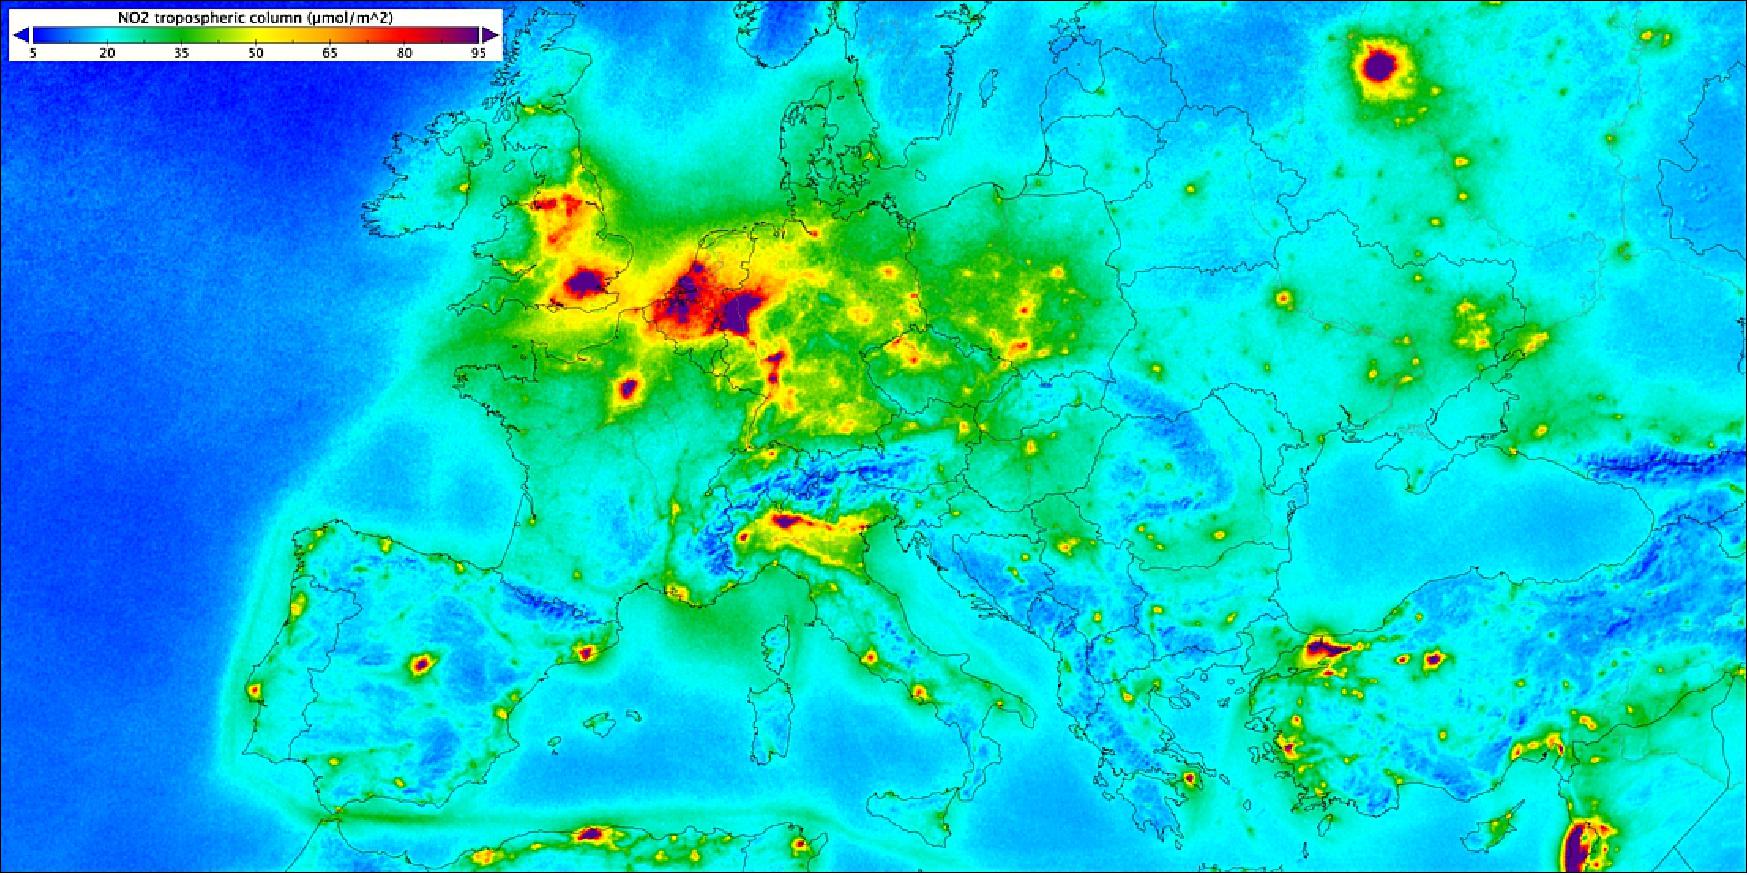 Figure 15: Nitrogen dioxide over Europe: Based on measurements gathered by the Copernicus Sentinel-5P mission between April and September 2018, the image shows high levels of nitrogen dioxide in London, Paris, Brussels, western Germany, Milan and Moscow. Nitrogen dioxide pollutes the air mainly as a result of traffic and the combustion of fossil fuel in industrial processes. It has a significant impact on human health, contributing particularly to respiratory problems (image credit: ESA, the image contains modified Copernicus data (2018), processed by KNMI)